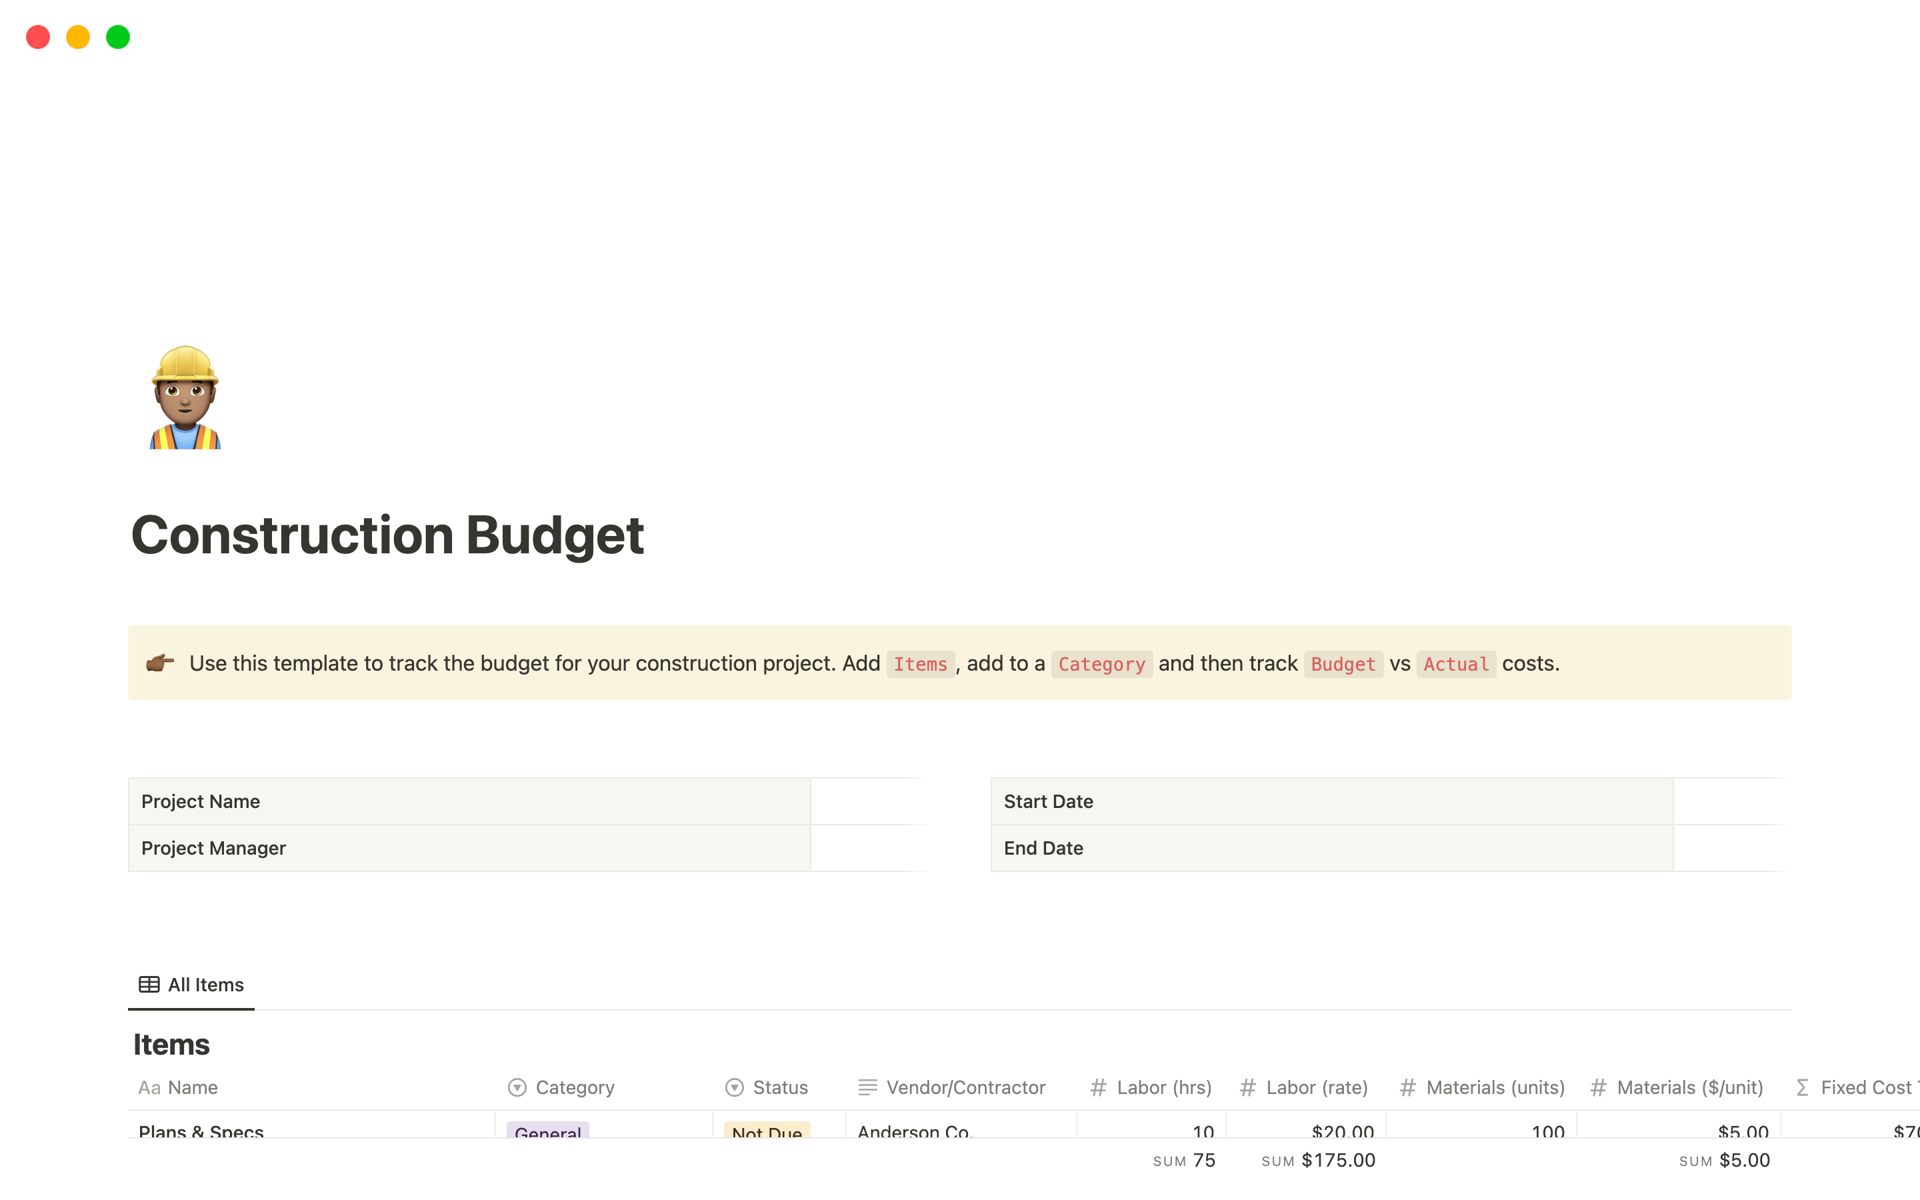 Use this template to track the budget for your construction project in Notion.